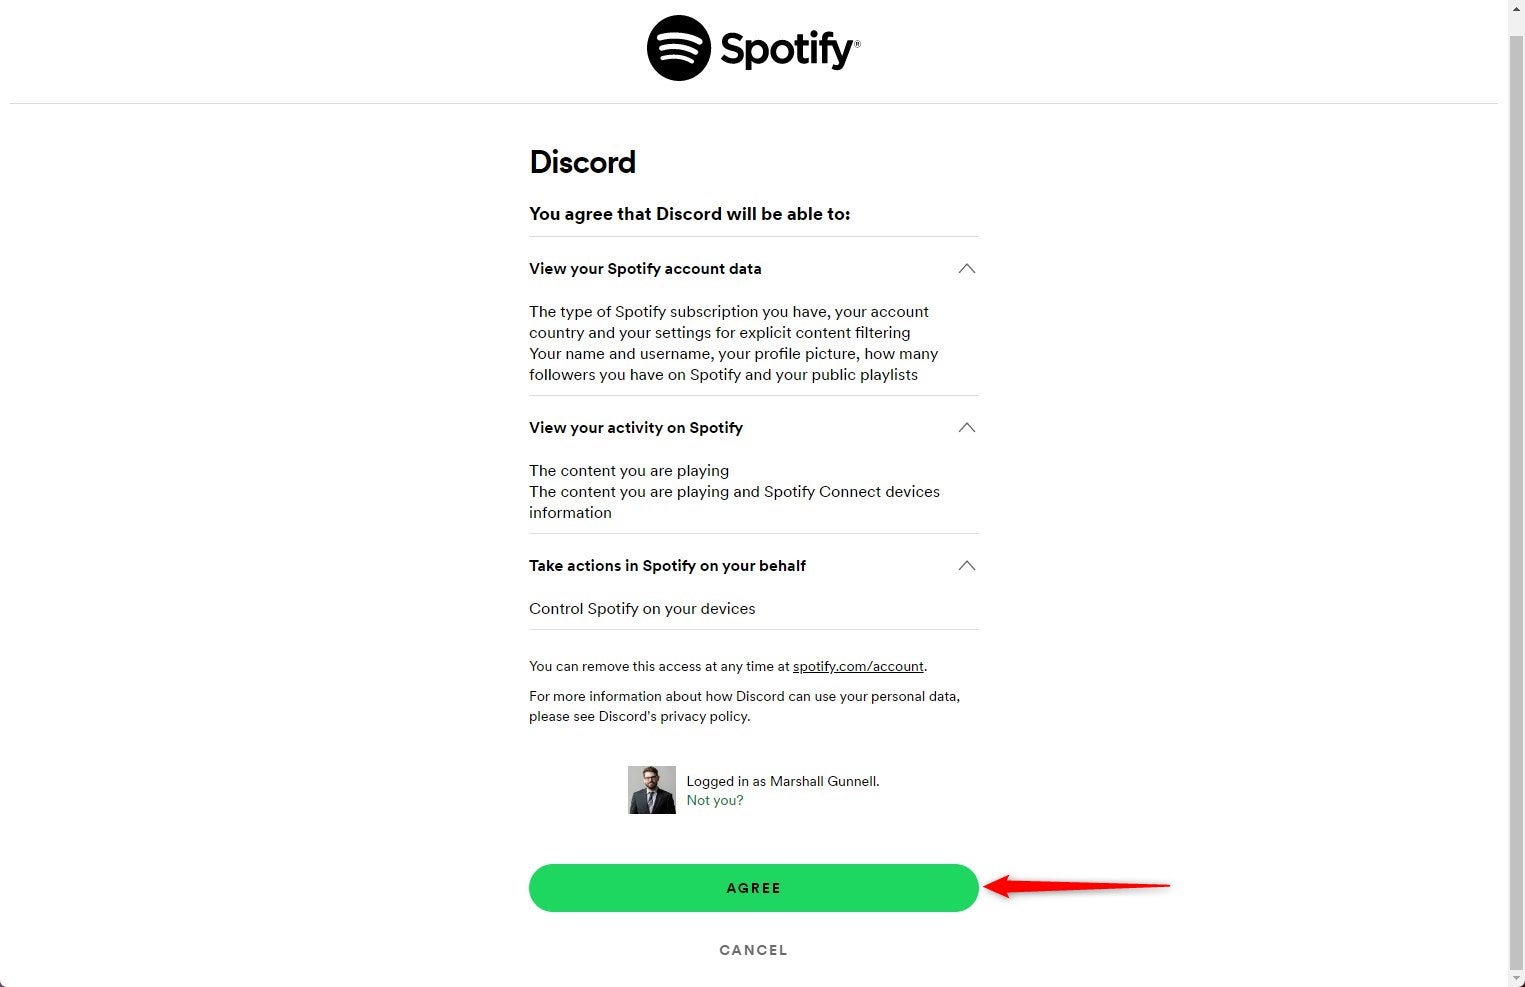 Agree to give Spotify the necessary permissions.